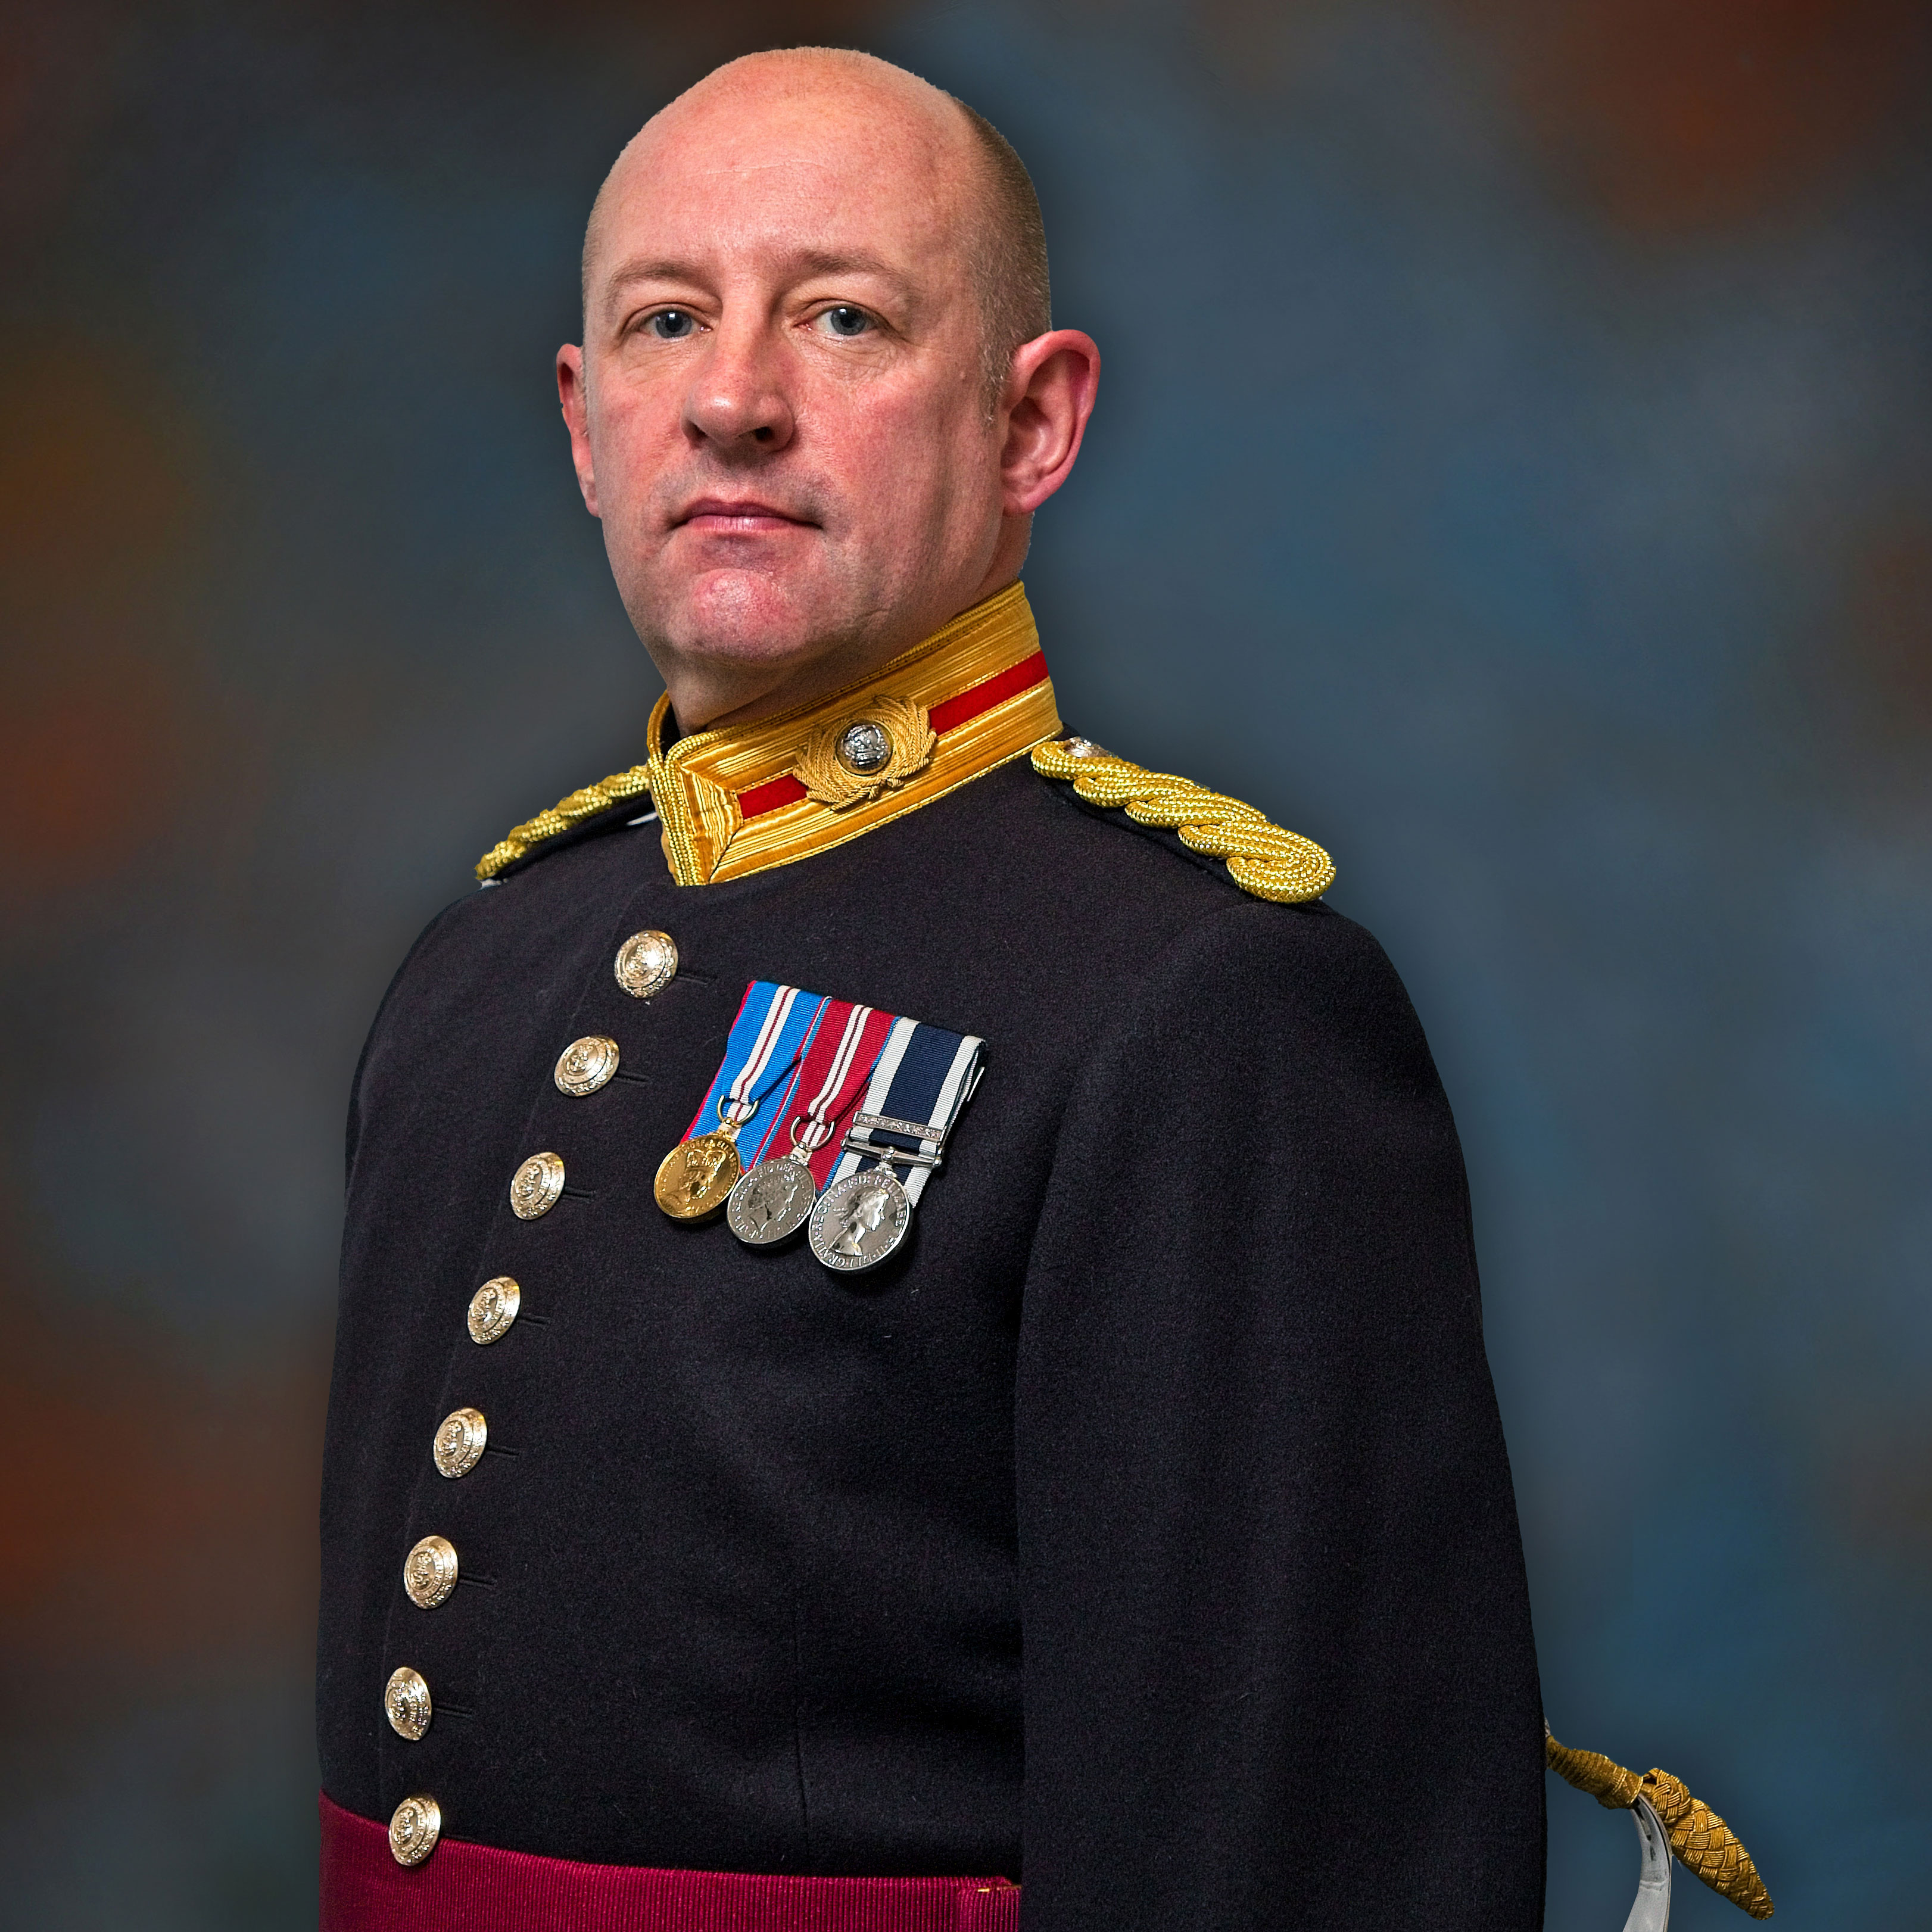 Warrant Officer 1 (WO1) Mike Robinson 